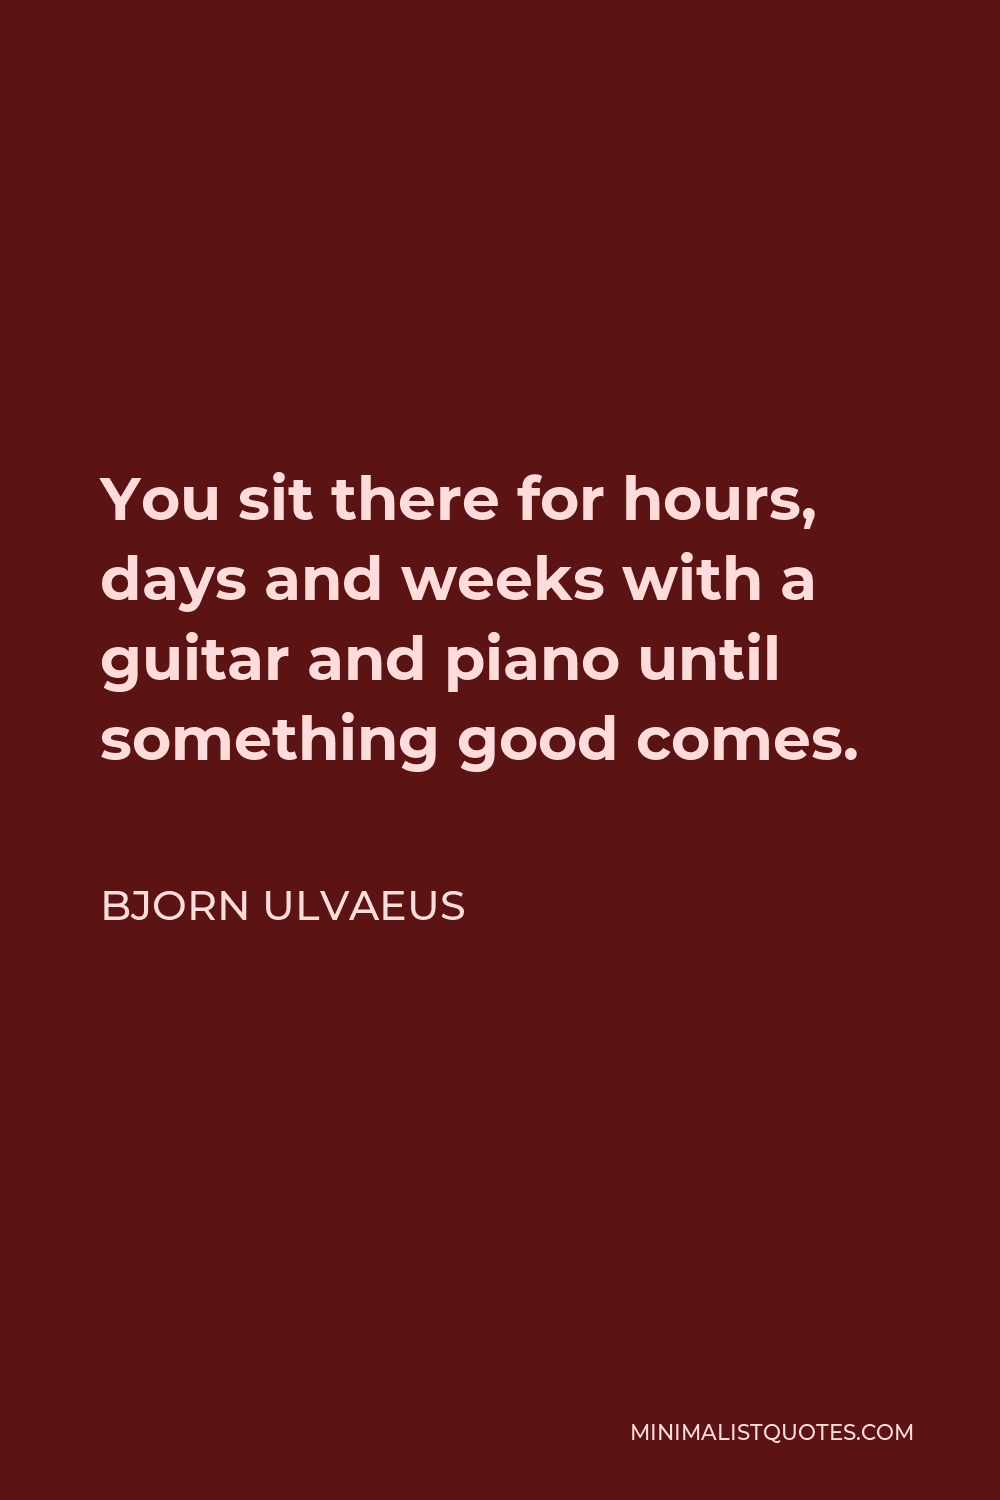 Bjorn Ulvaeus Quote - You sit there for hours, days and weeks with a guitar and piano until something good comes.